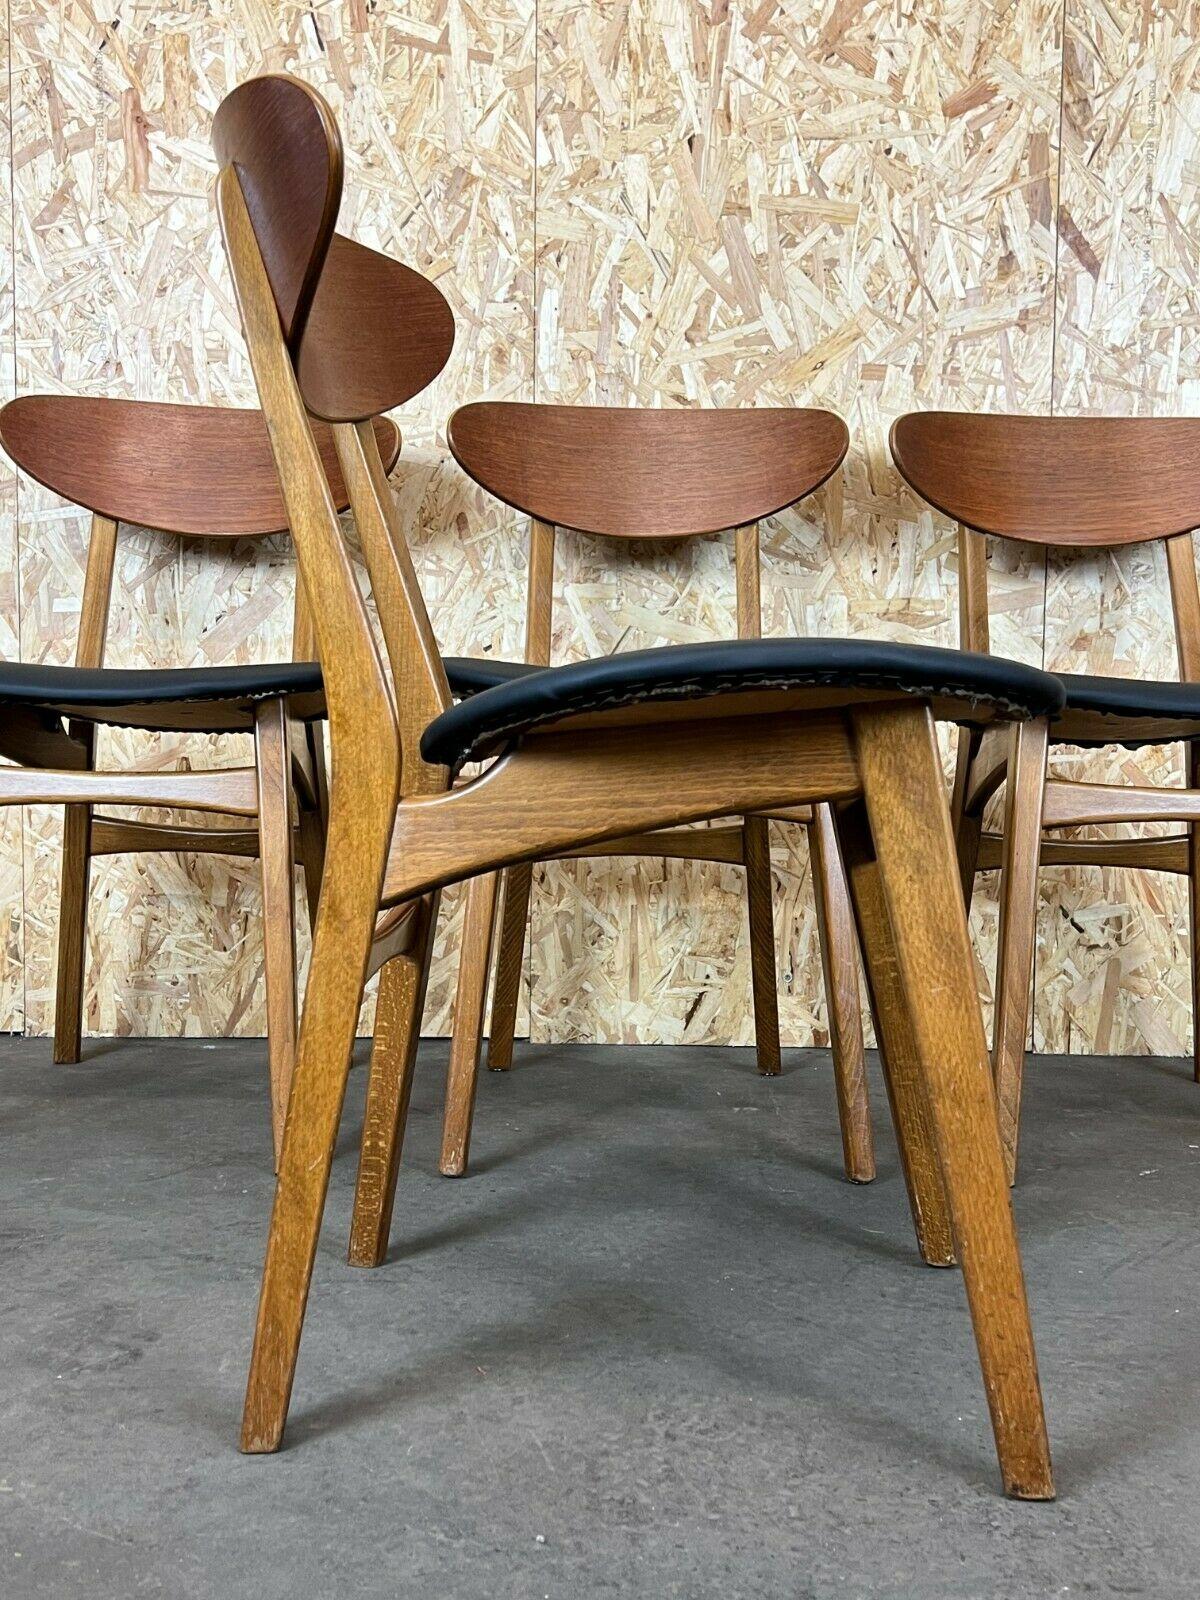 Late 20th Century 4x 60s 70s Teak Chairs Dining Chair Danish Modern Design 60s For Sale